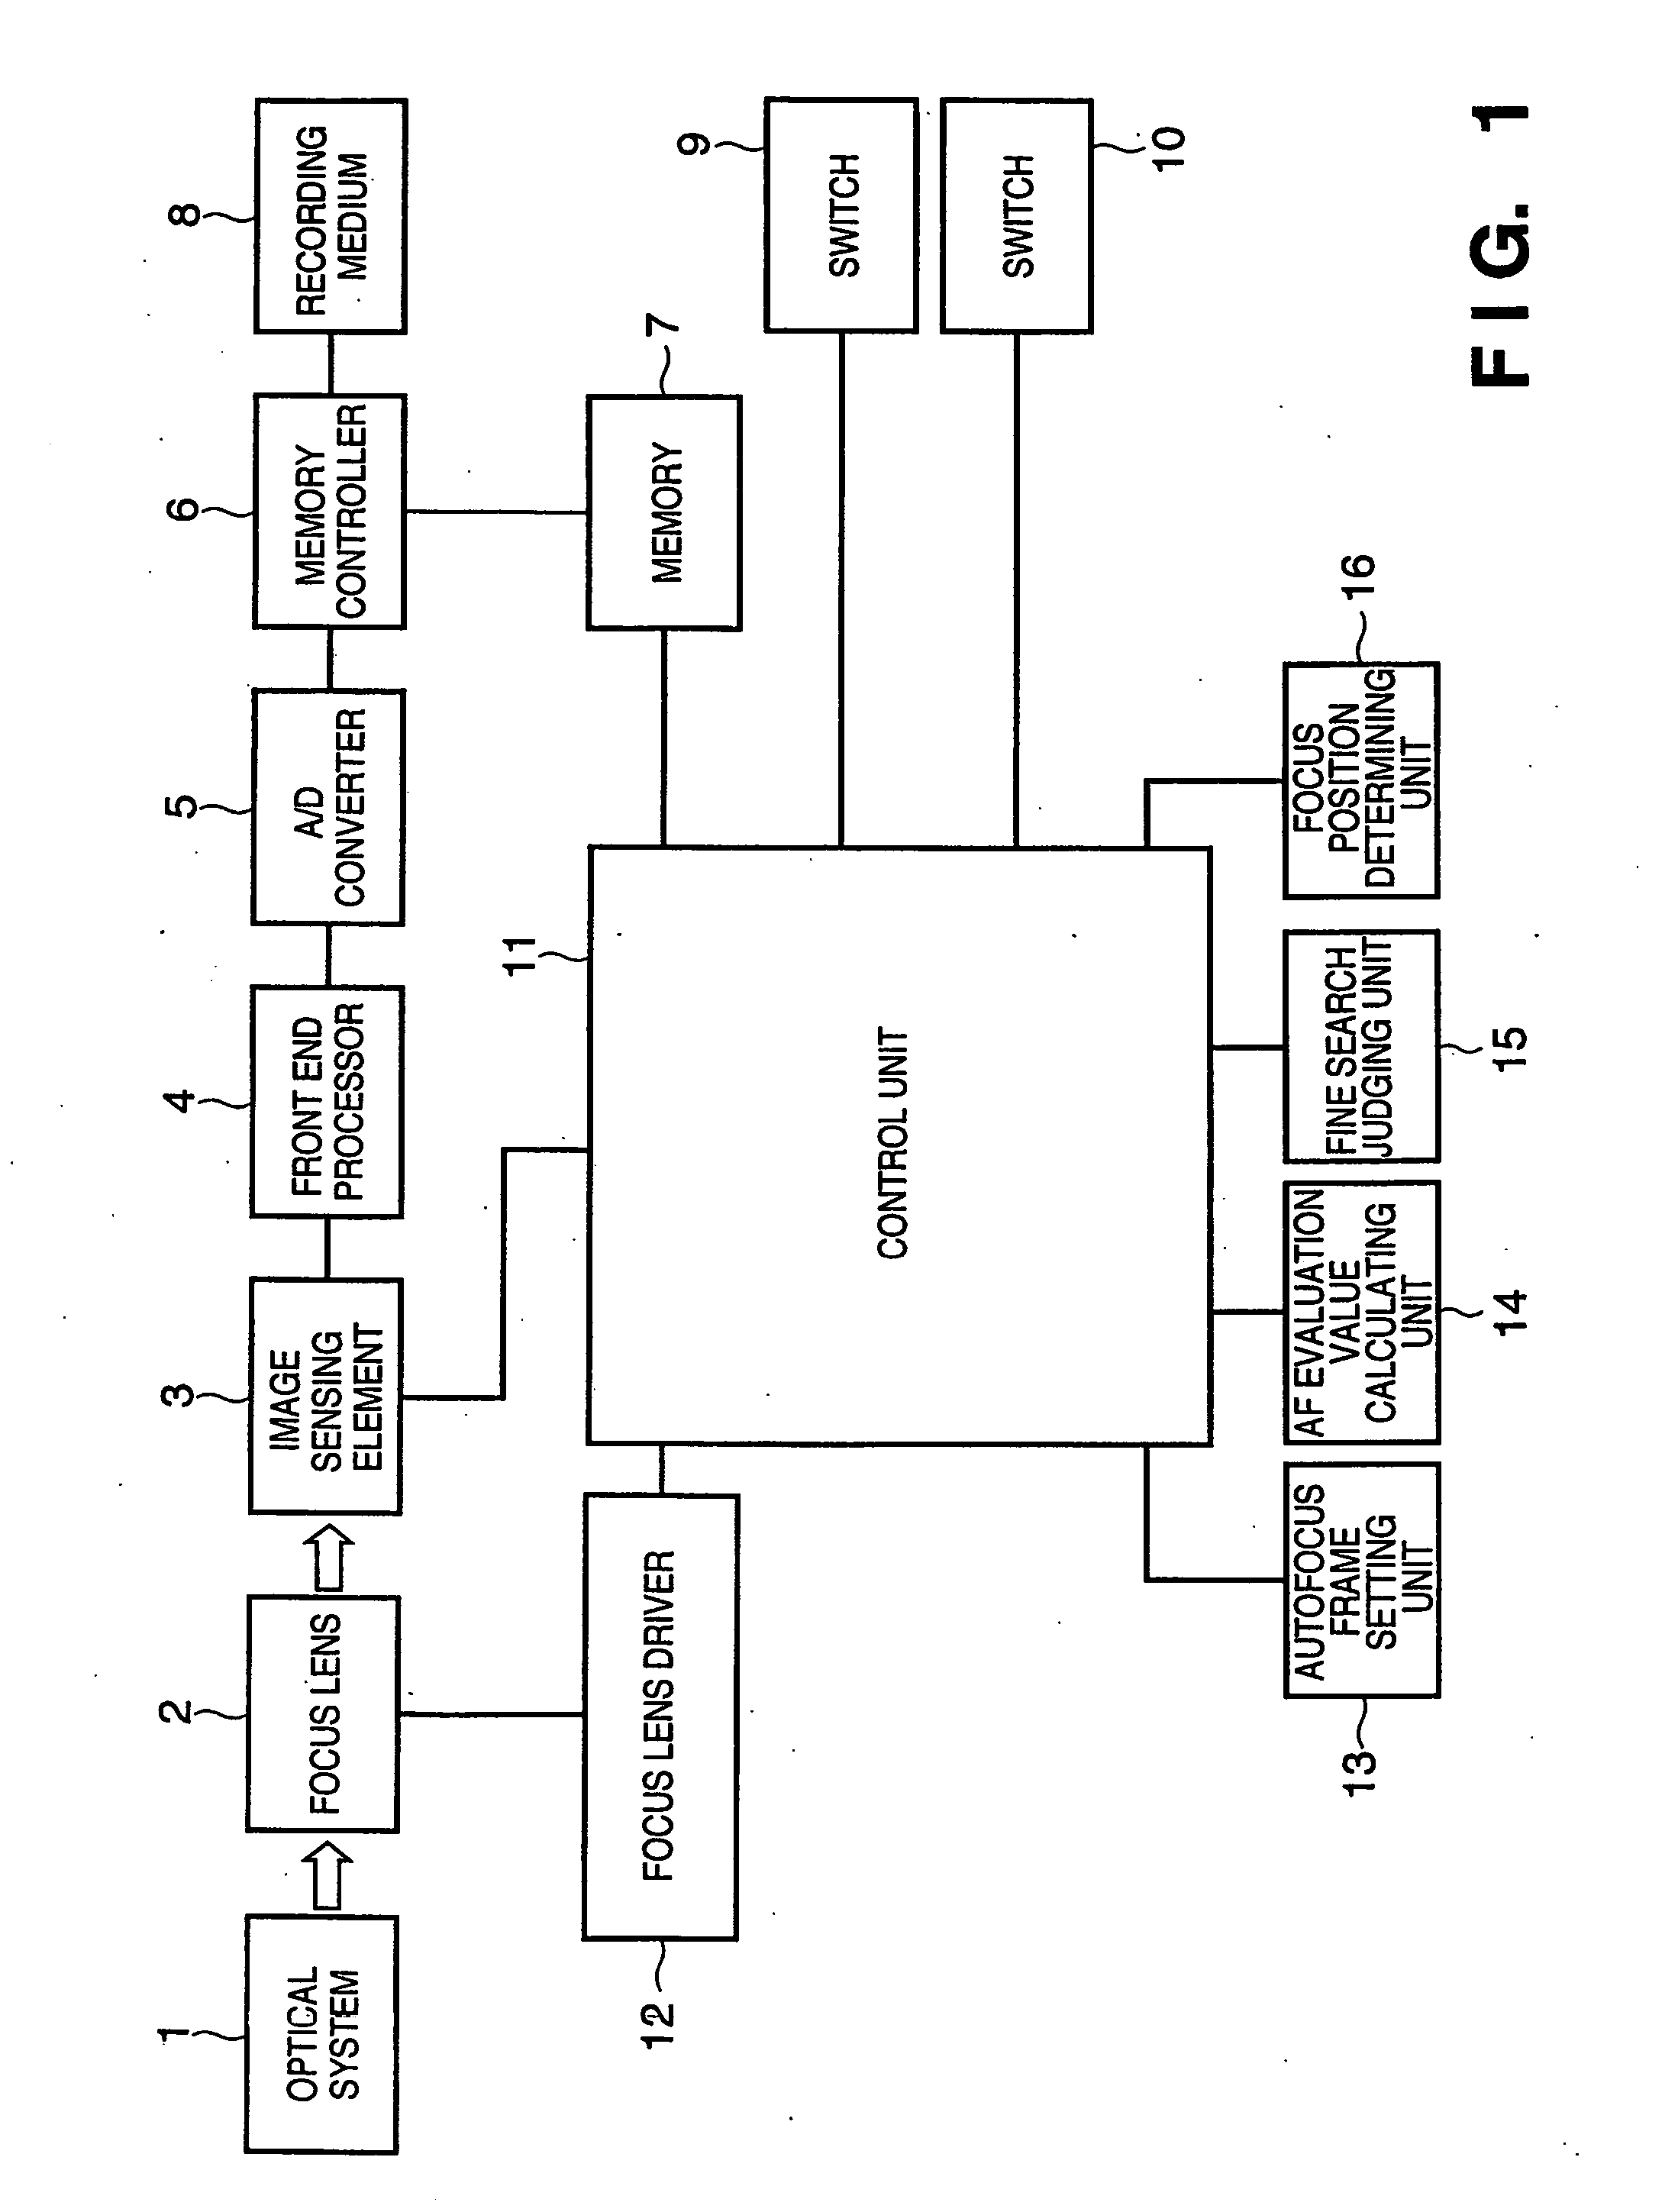 Focus position detection apparatus and method